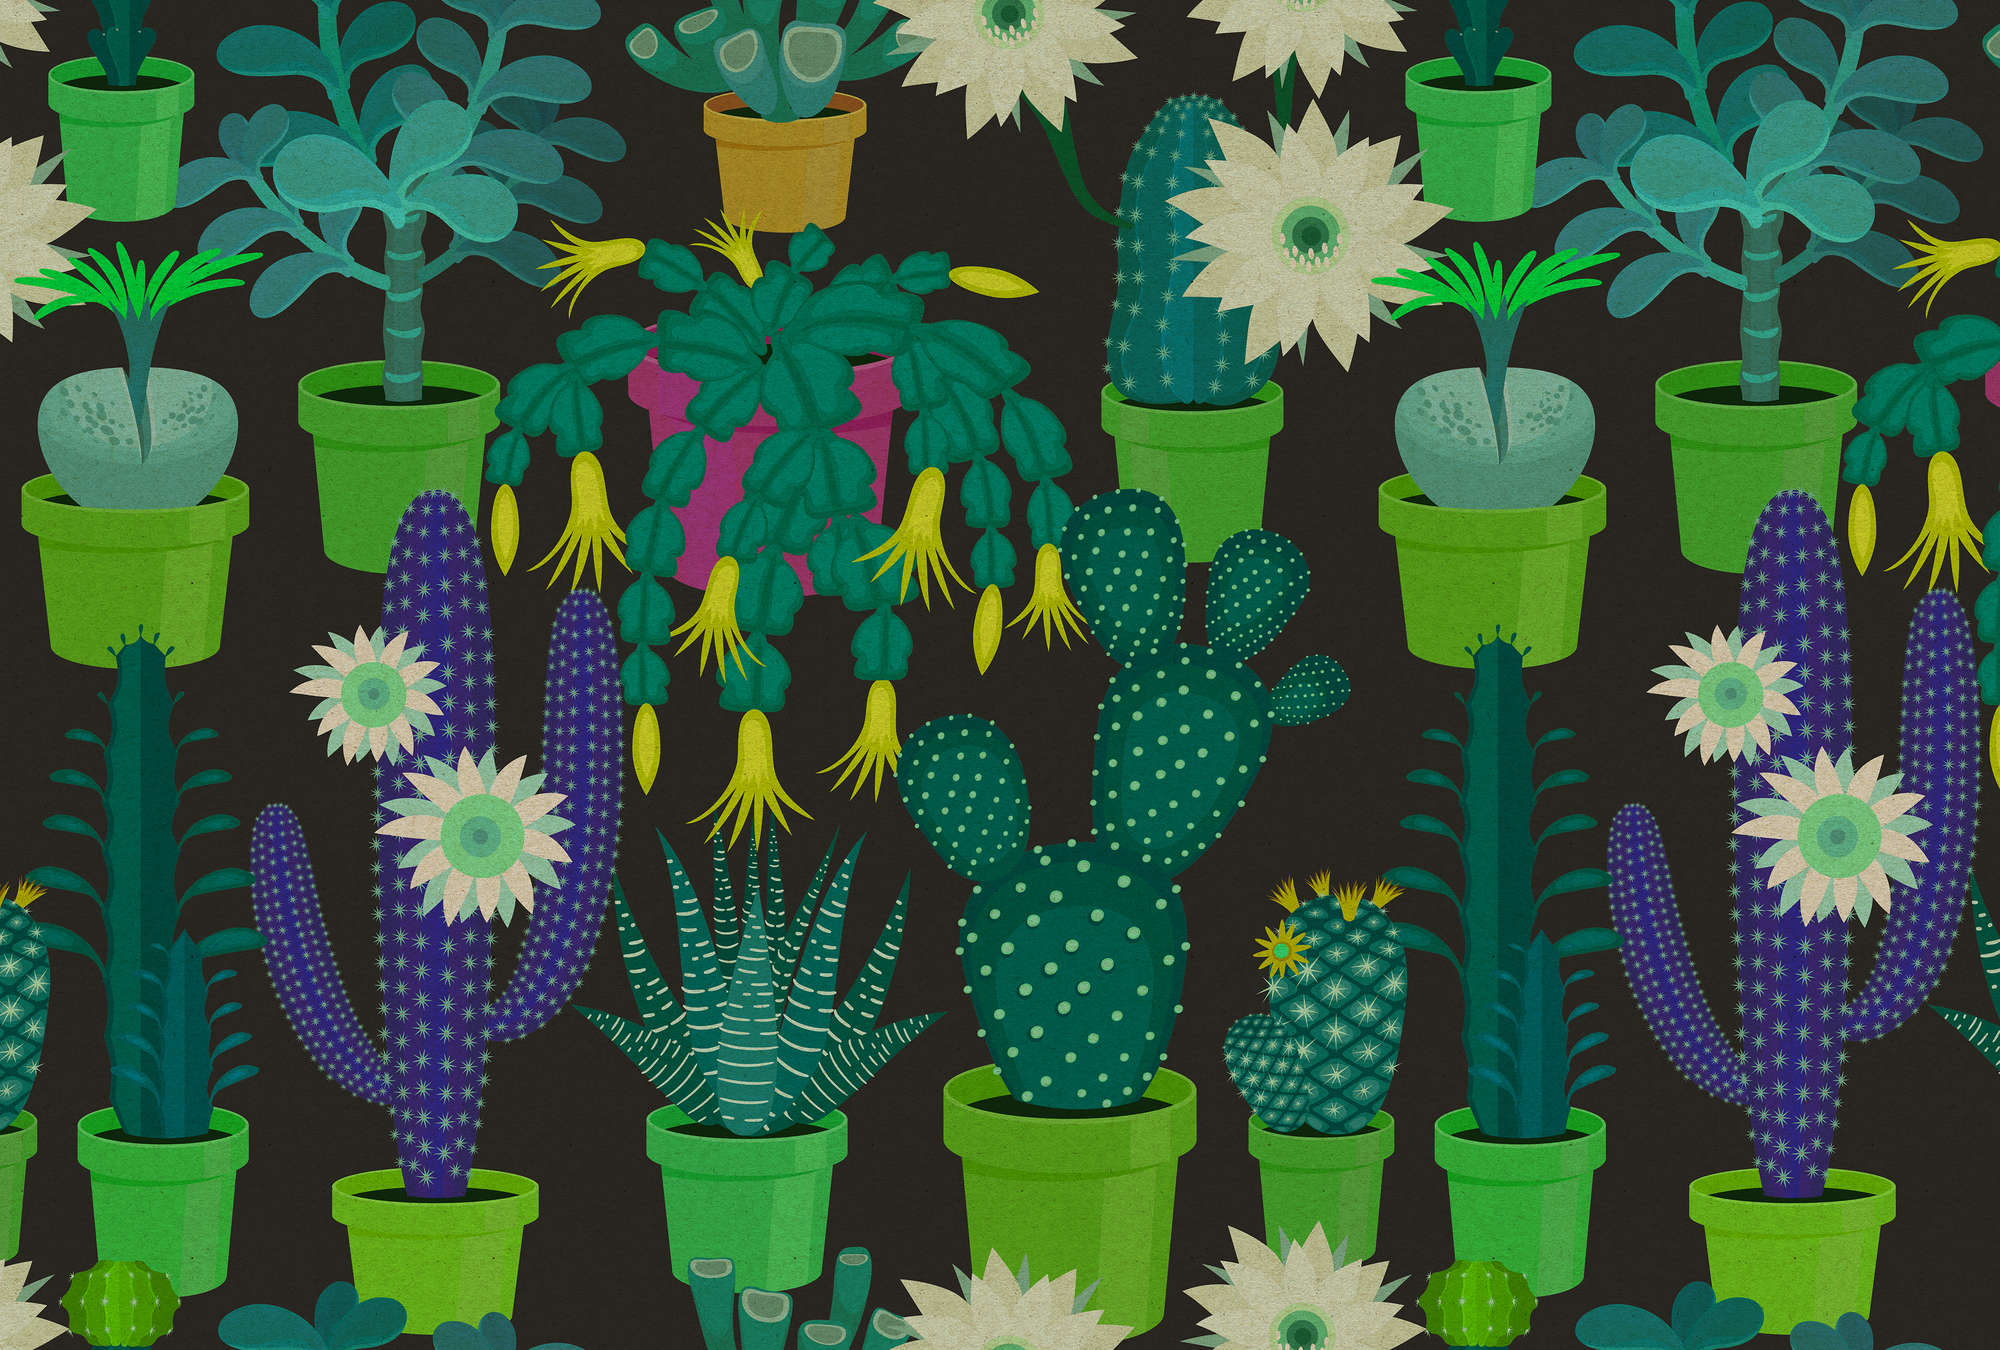             Cactus garden 2 - Photo wallpaper with colourful cacti in comic style in cardboard structure - Green, Black | Structure non-woven
        